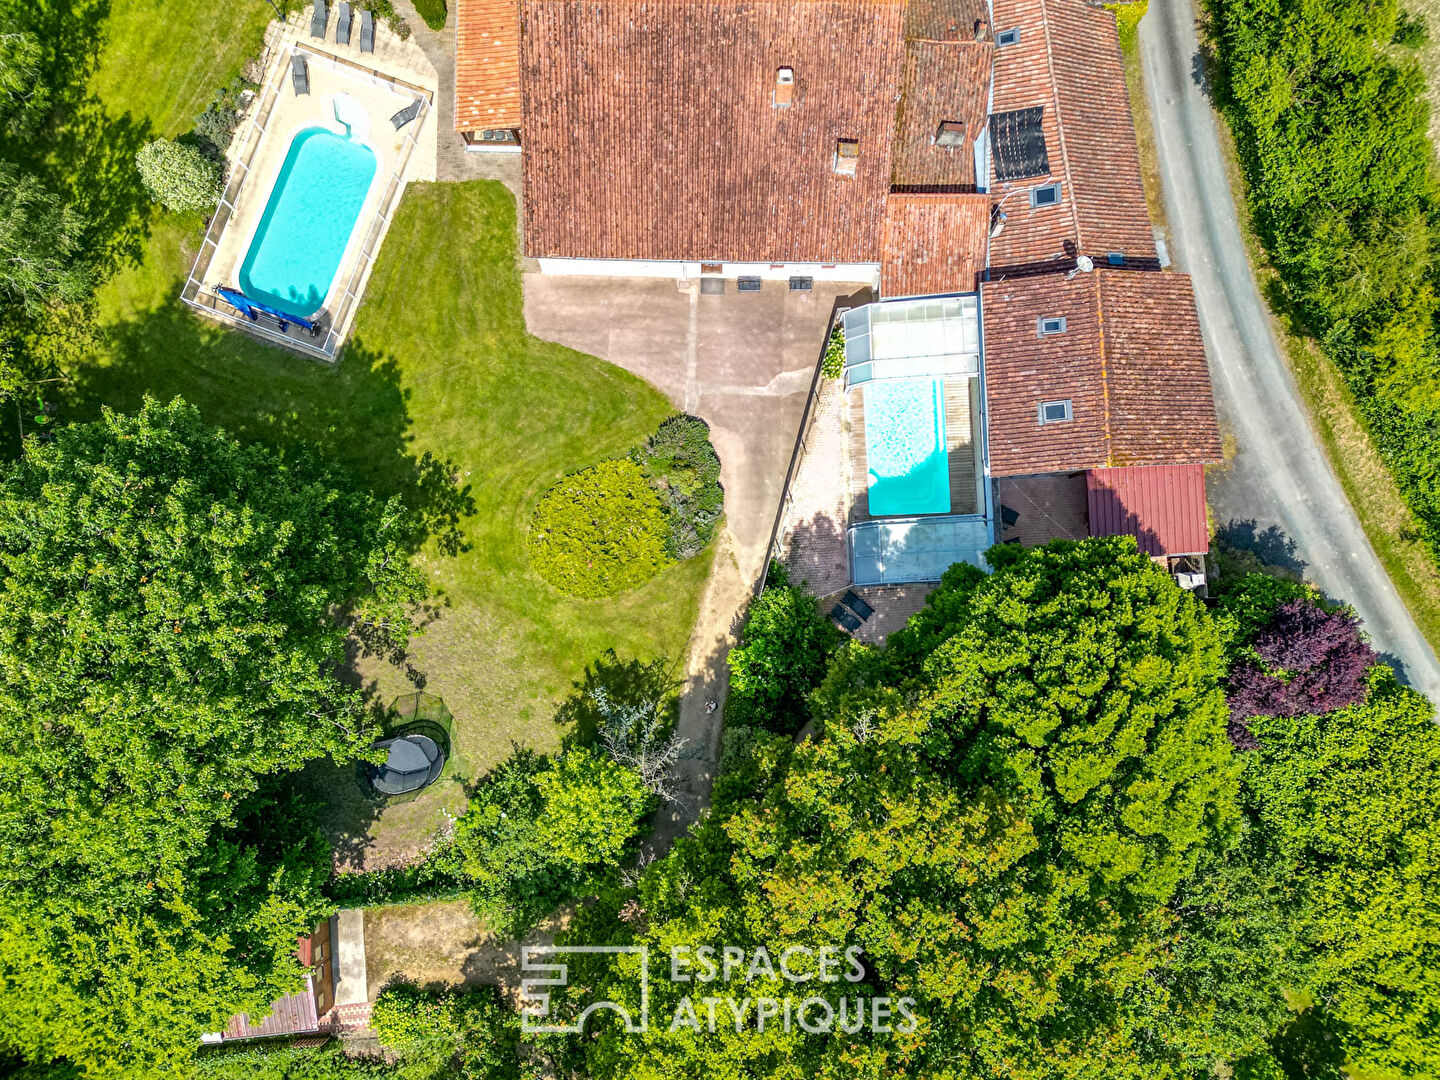 Old renovated farm with two accommodations and their swimming pool